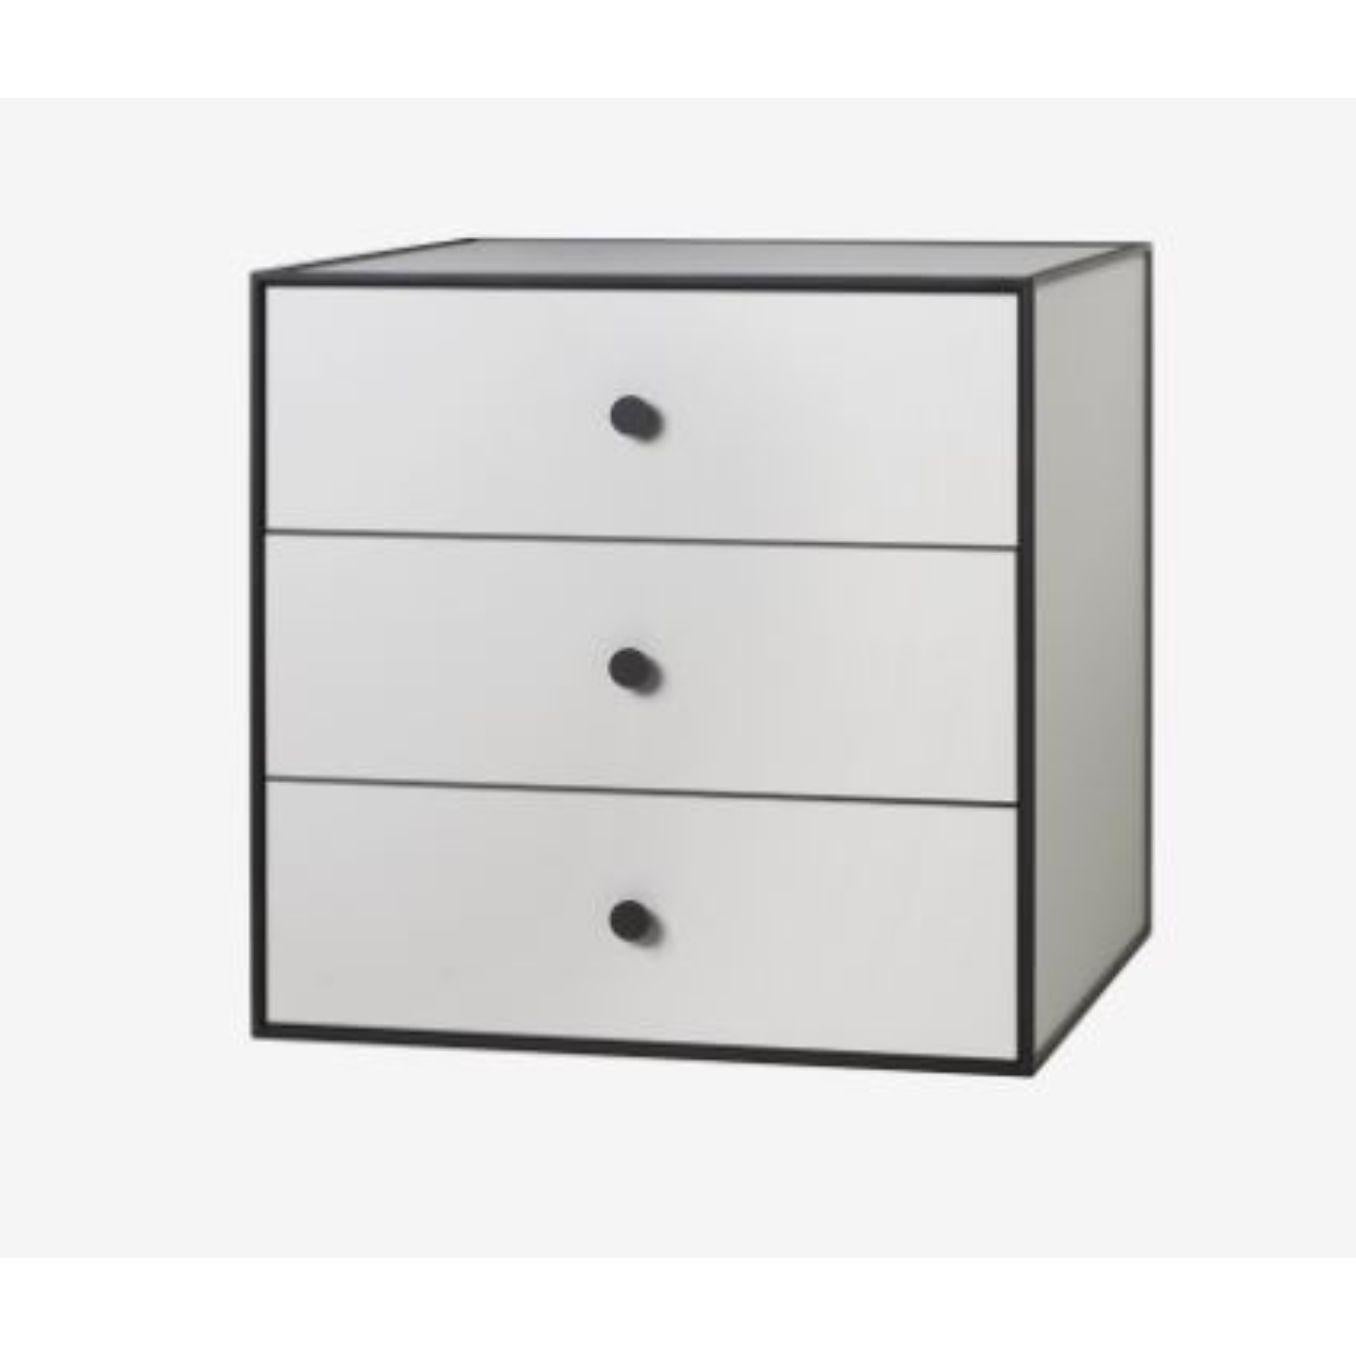 49 light grey frame box with 3 drawers by Lassen.
Dimensions: D 49 x W 42 x H 49 cm. 
Materials: Finér, Melamin, Melamin, Melamine, Metal, Veneer.
Also available in different colors and dimensions. 
Weight: 24 Kg.


By Lassen is a Danish